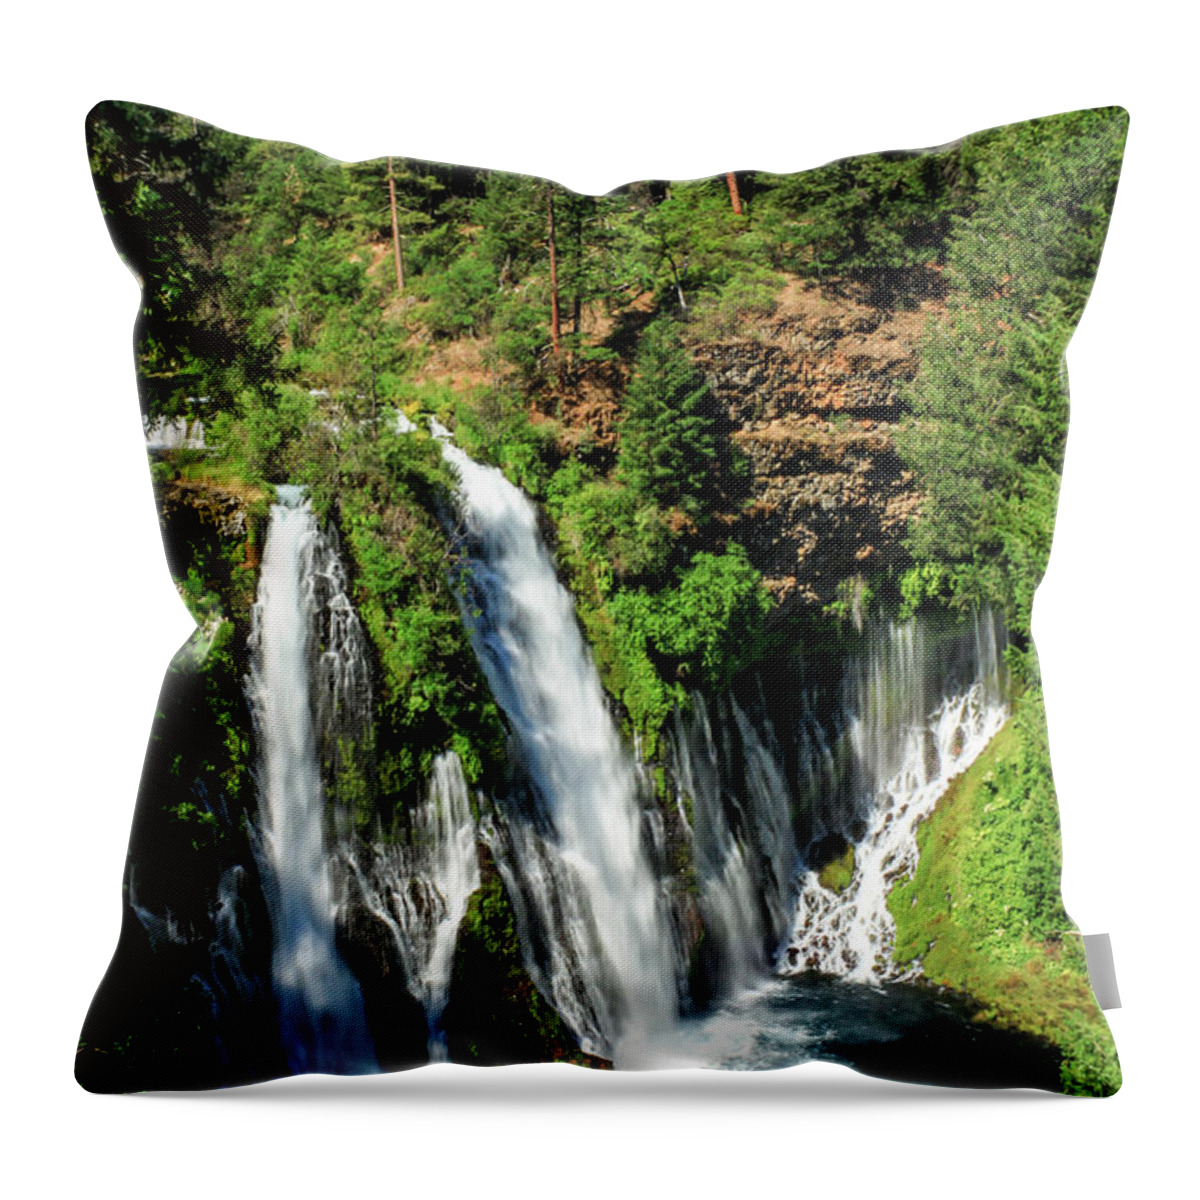 Landscape Throw Pillow featuring the photograph Burney Falls by James Eddy